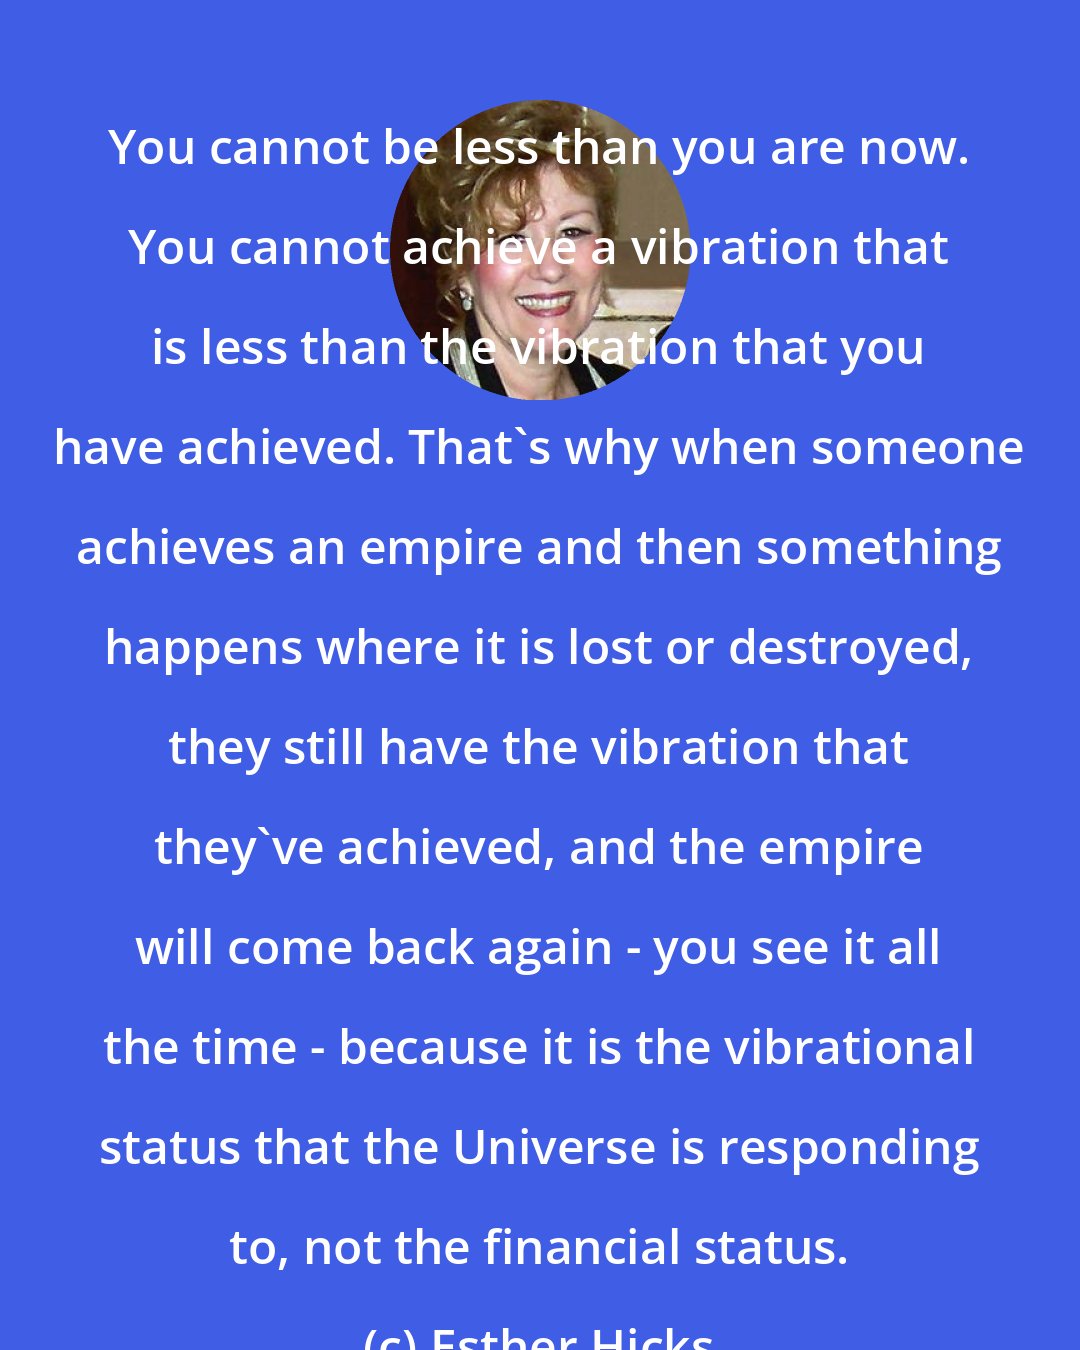 Esther Hicks: You cannot be less than you are now. You cannot achieve a vibration that is less than the vibration that you have achieved. That's why when someone achieves an empire and then something happens where it is lost or destroyed, they still have the vibration that they've achieved, and the empire will come back again - you see it all the time - because it is the vibrational status that the Universe is responding to, not the financial status.